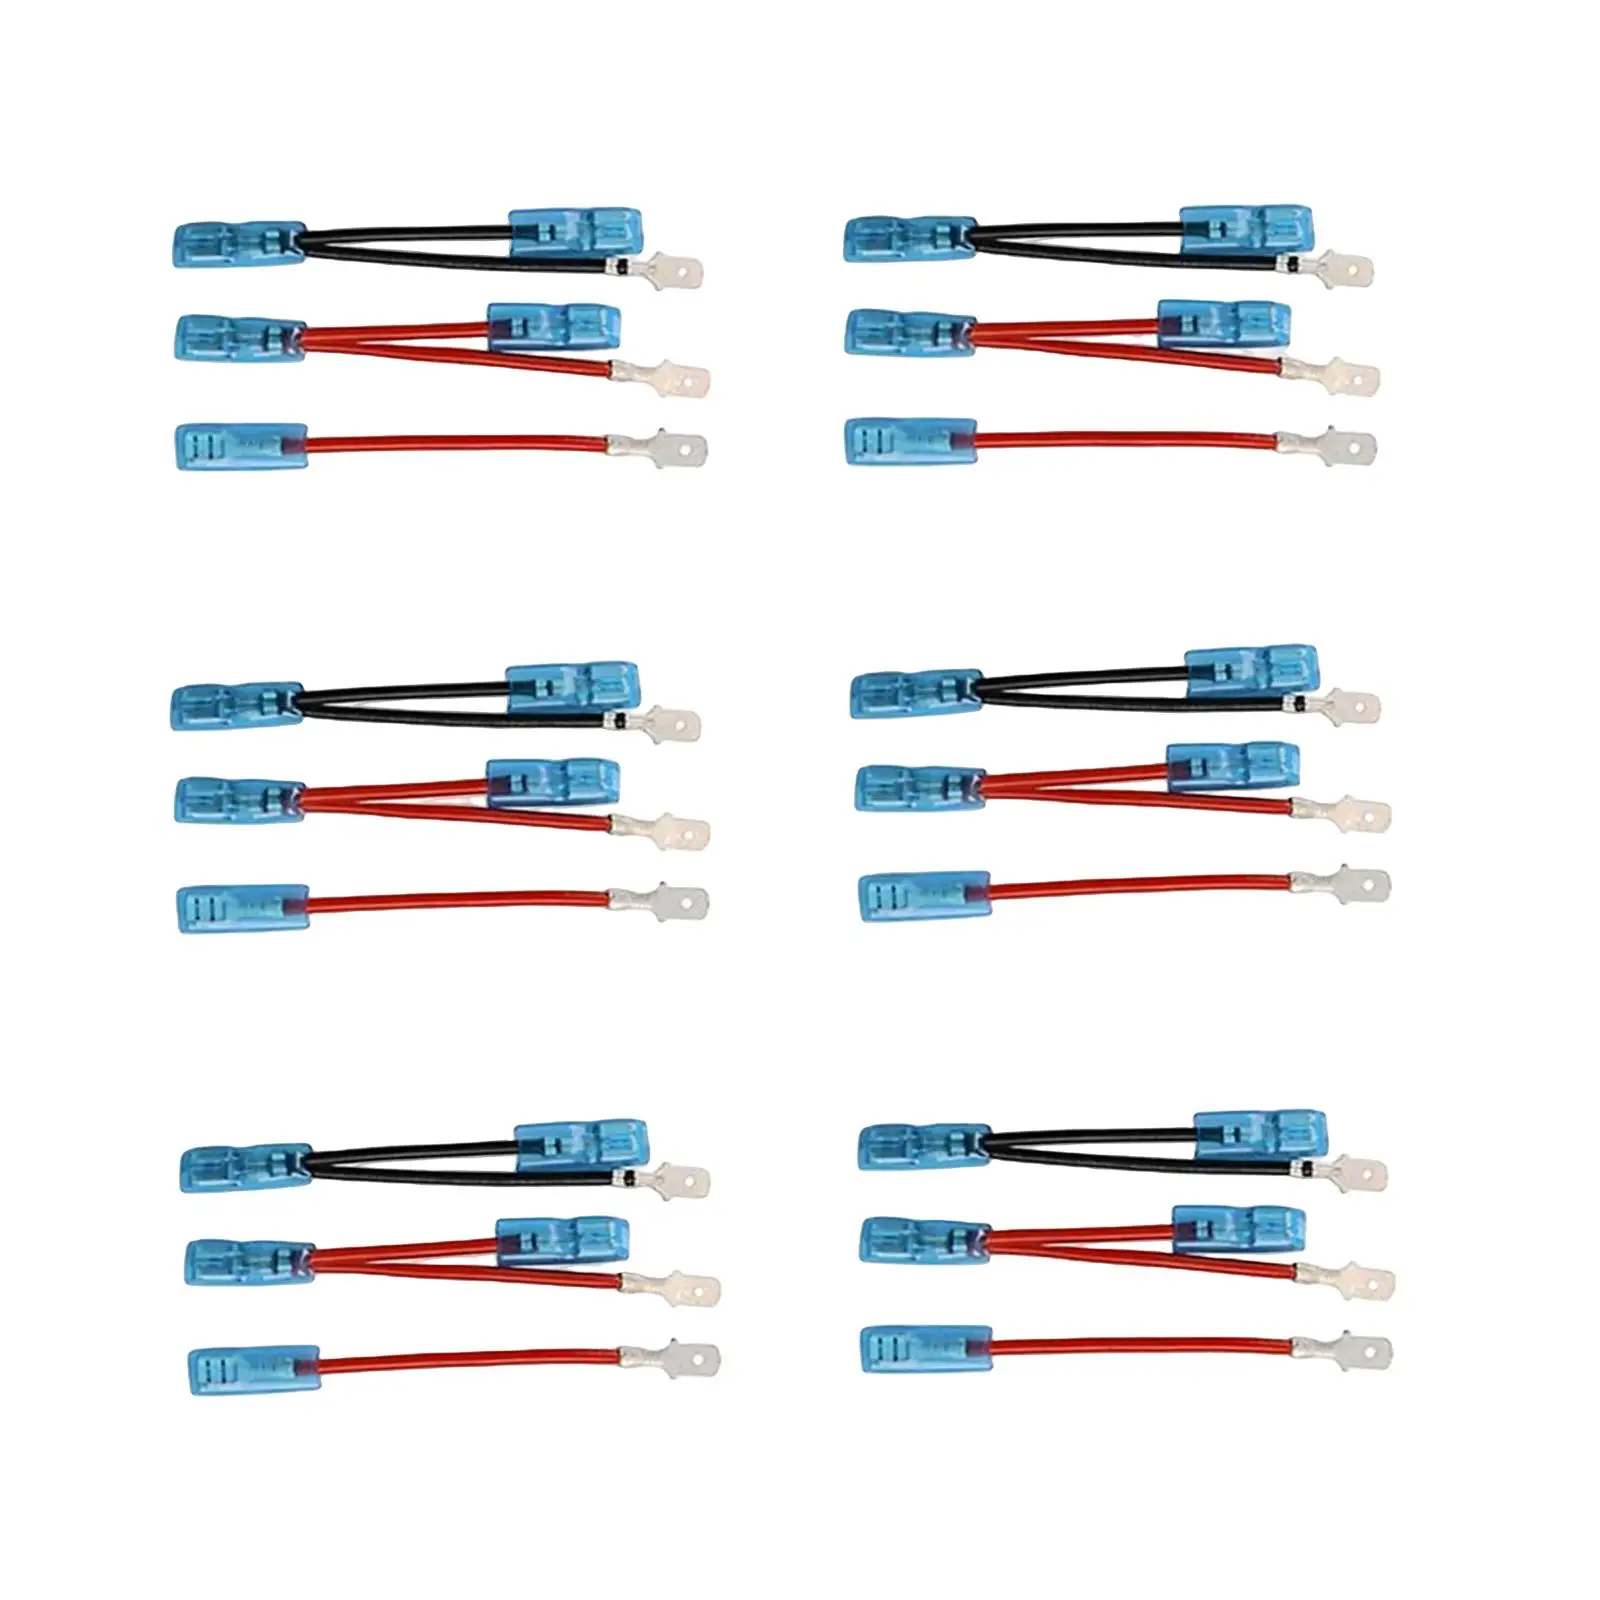 6Pcs 5 Pin Rocker Switch Jumper Wires Set Parts Accessories Universal Easy to Install Replaces Professional for Auto Yachts